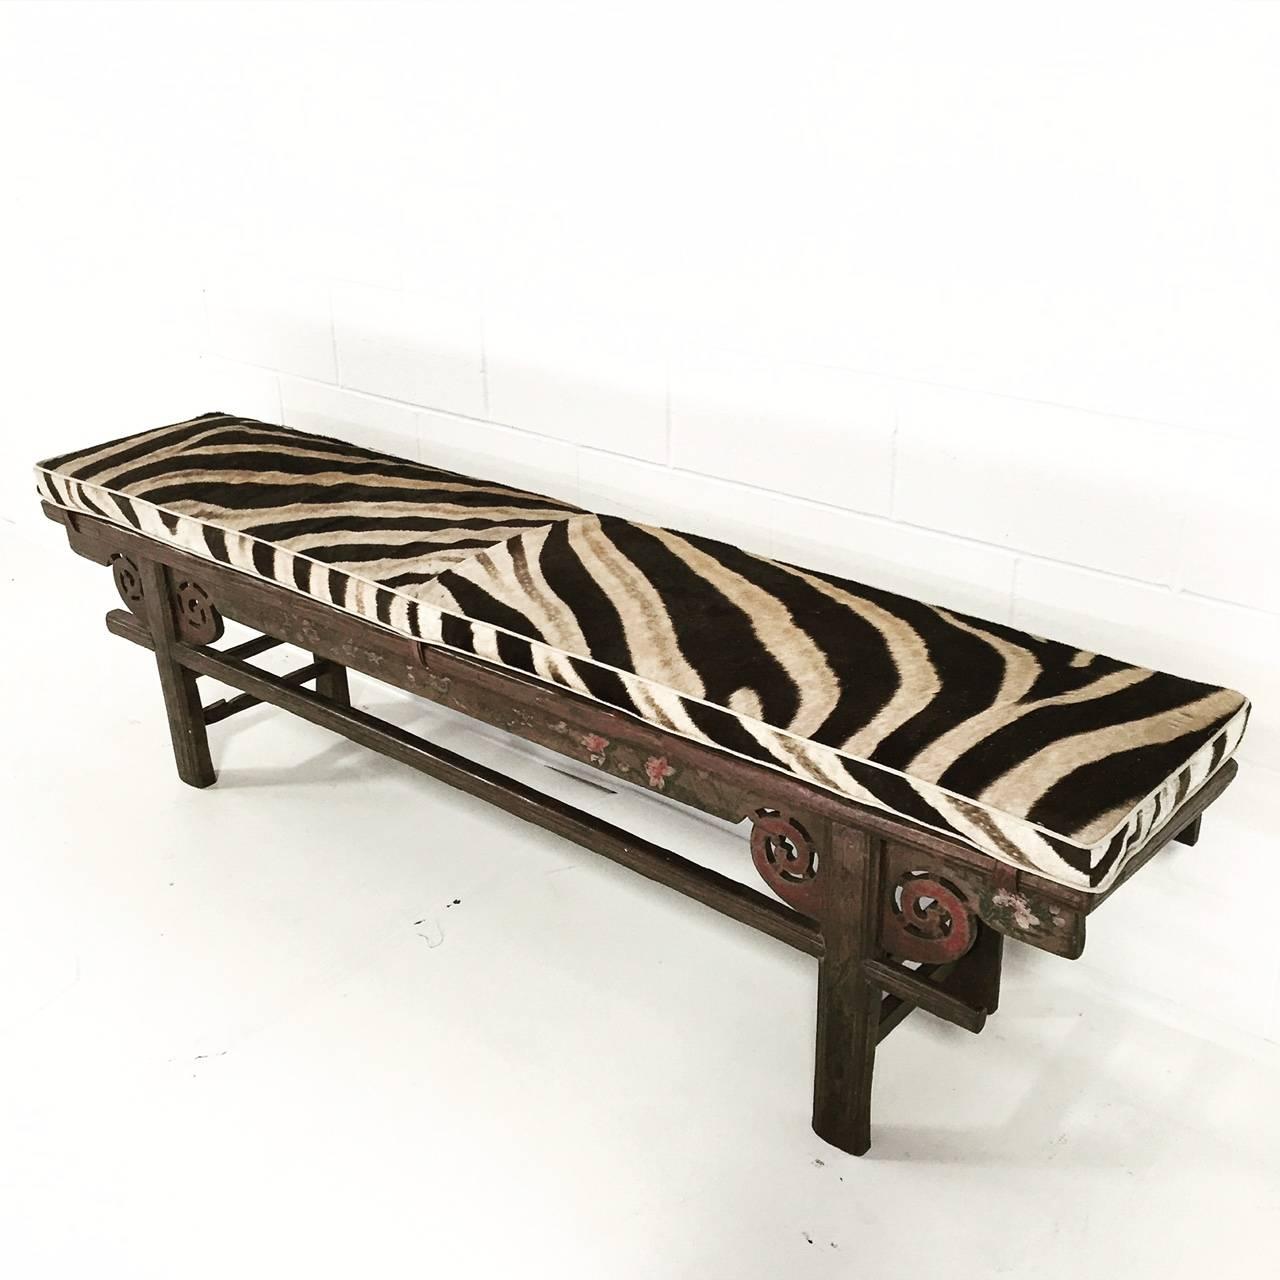 Vintage Chinese Painted Farmhouse Bench with Zebra Hide Cushion 1